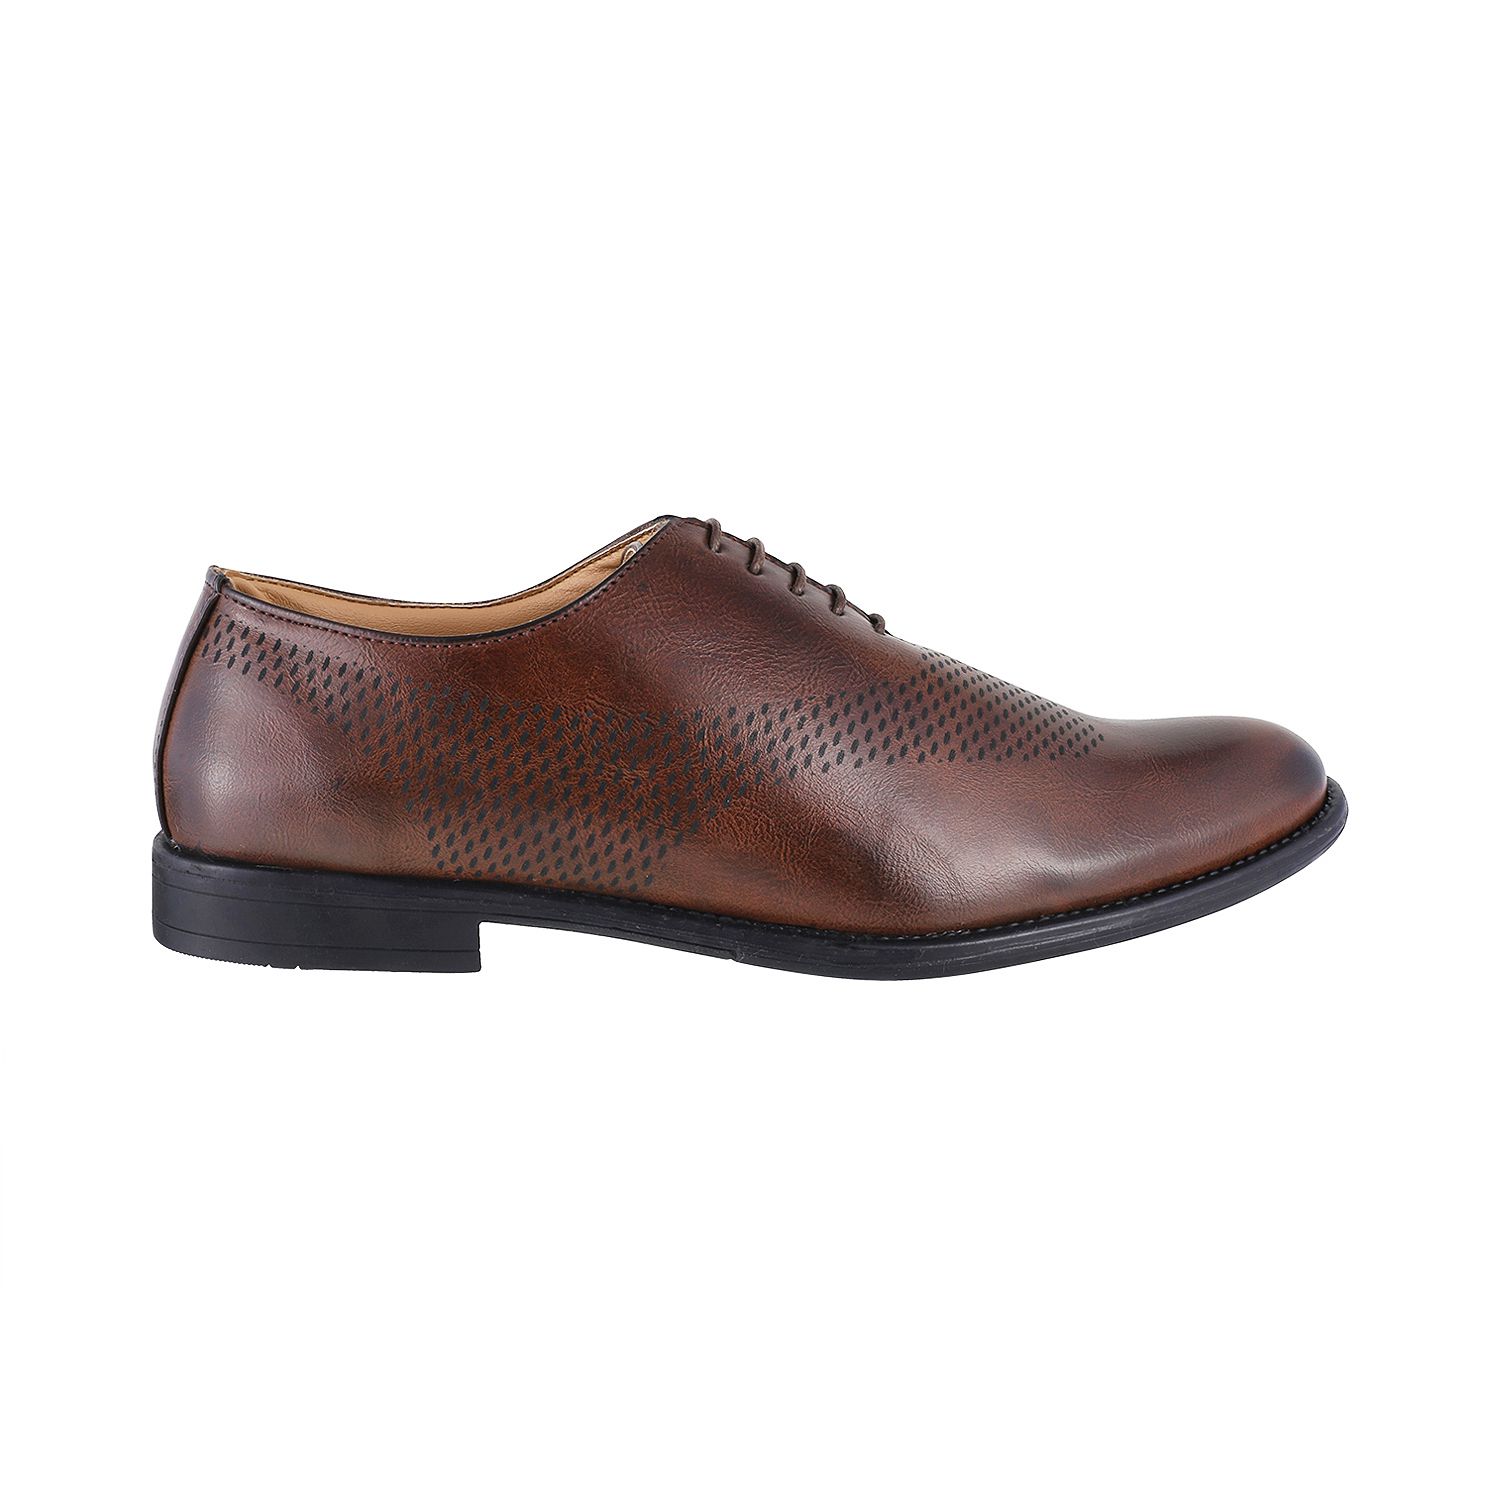 WALKWAY Derby Non-Leather BROWN Formal 